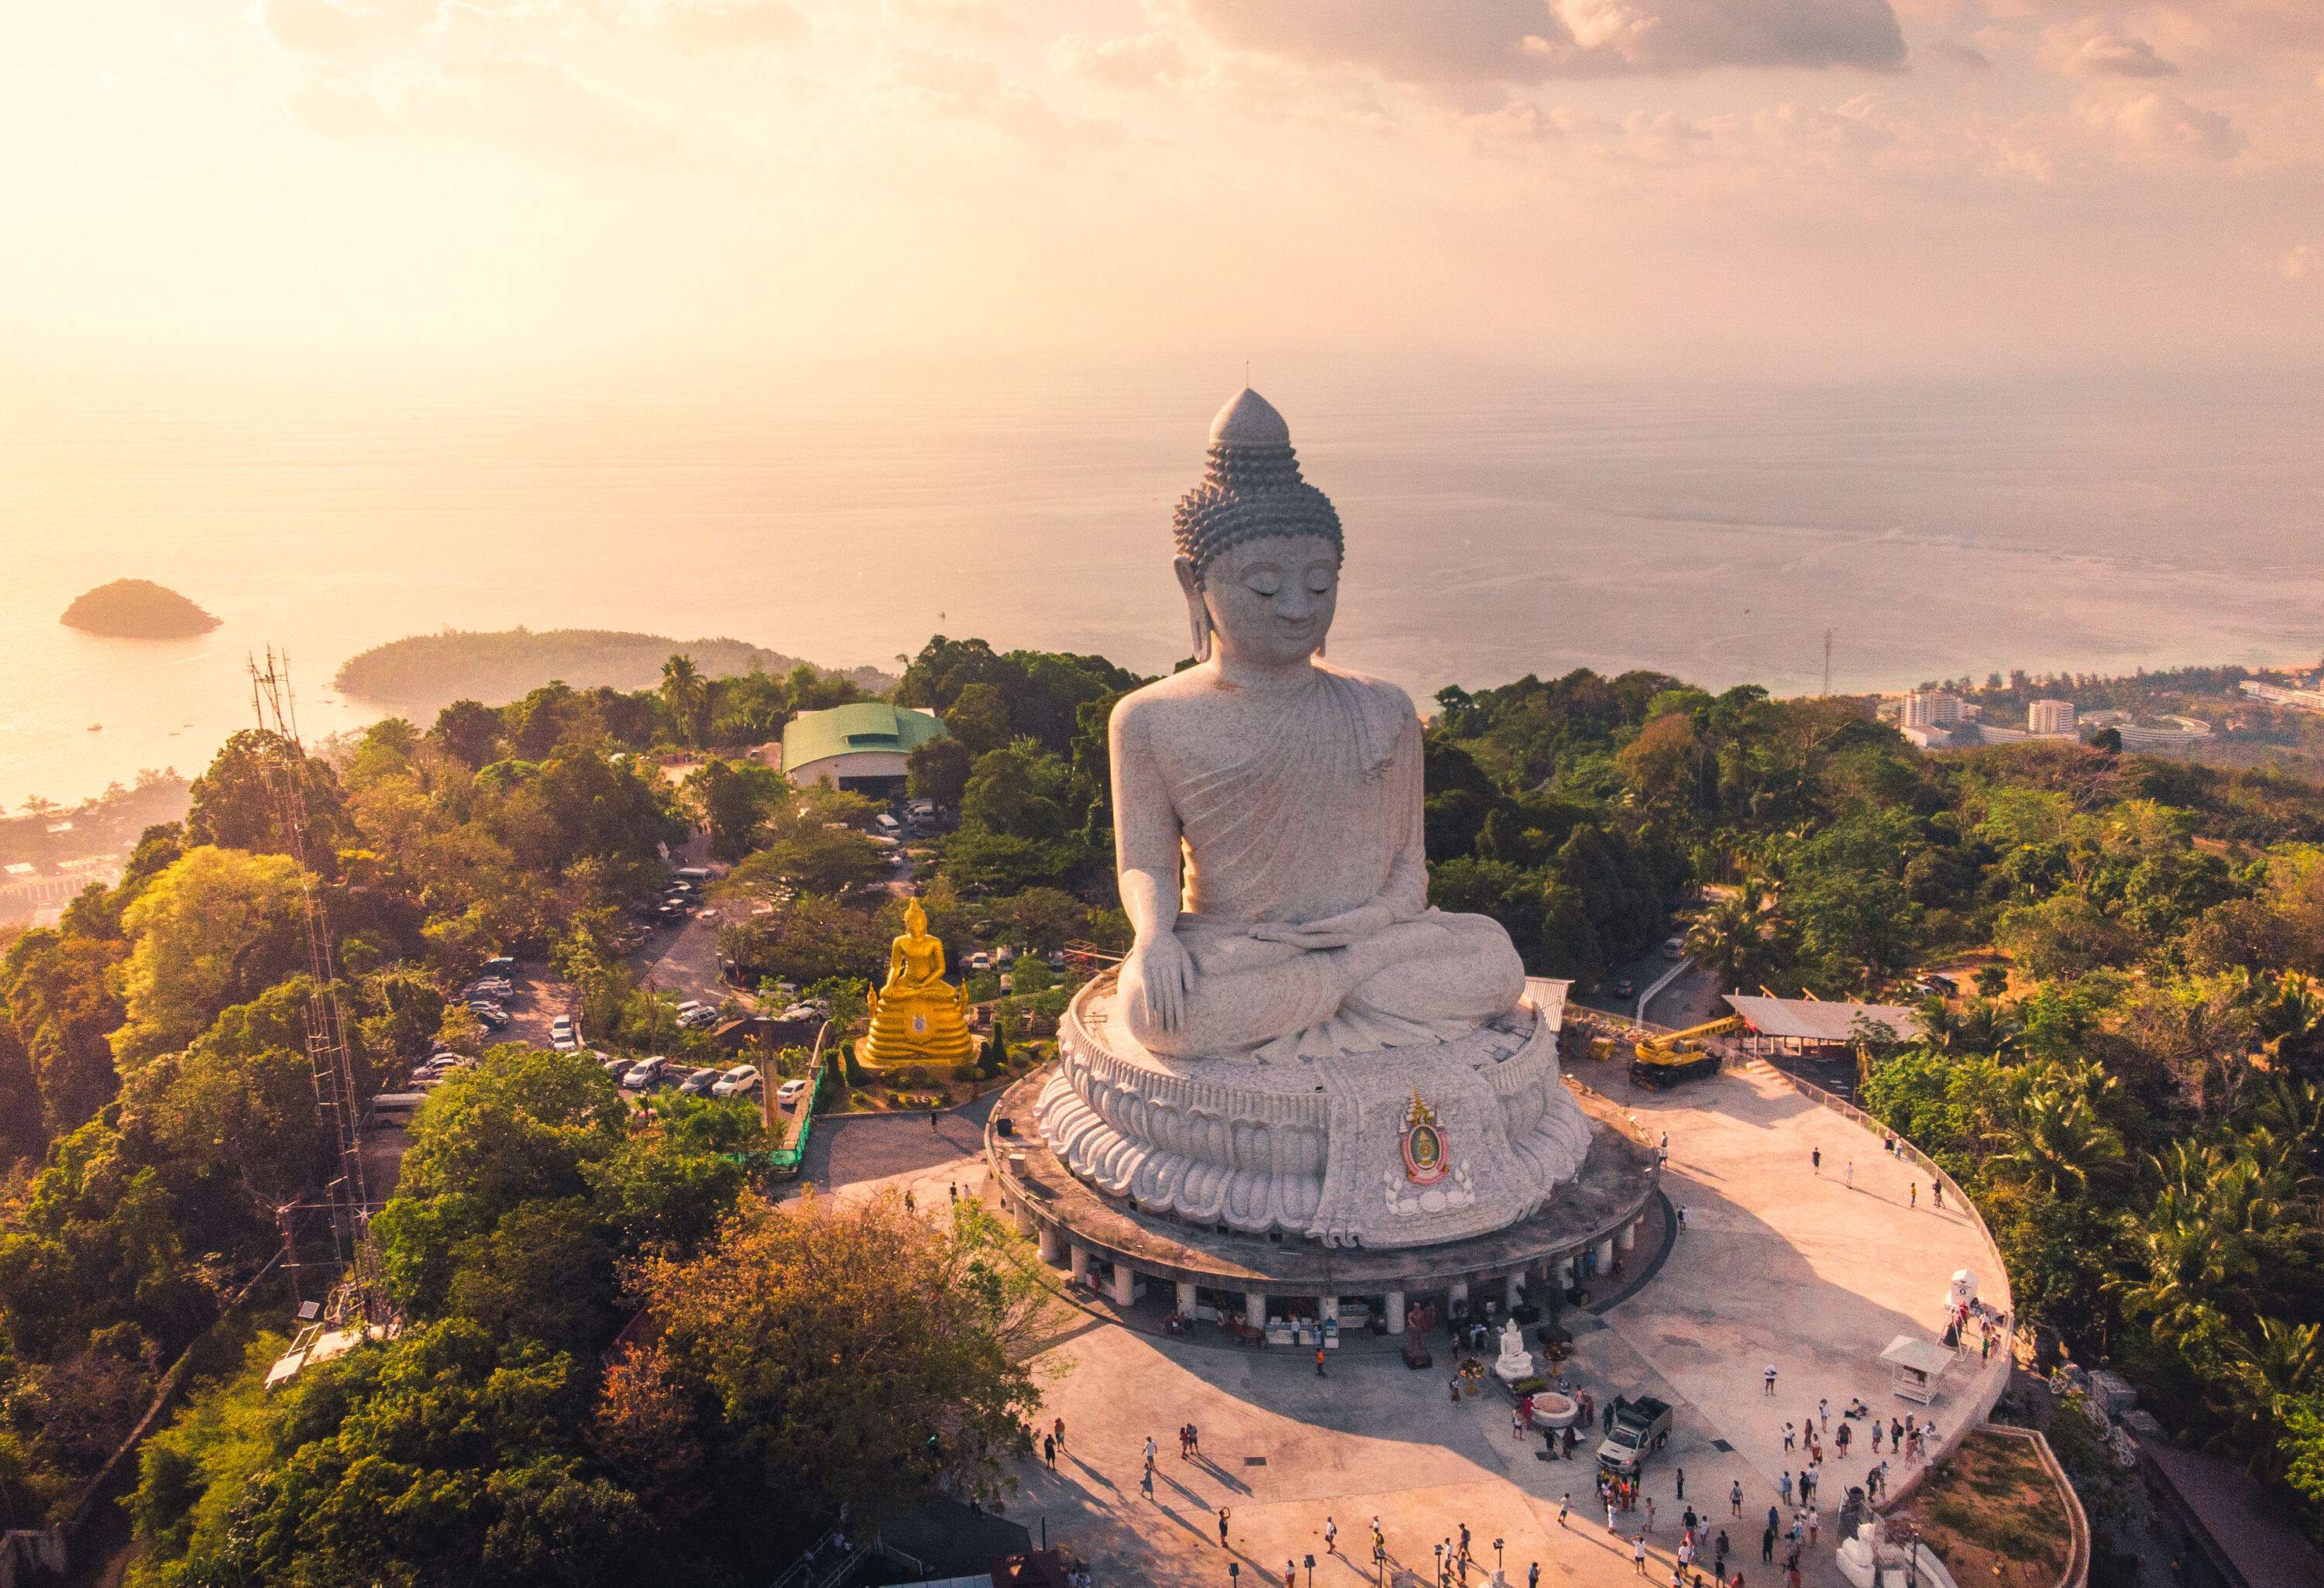 The Phuket Big Buddha statue sits at sunrise on a forested hill overlooking the sea.